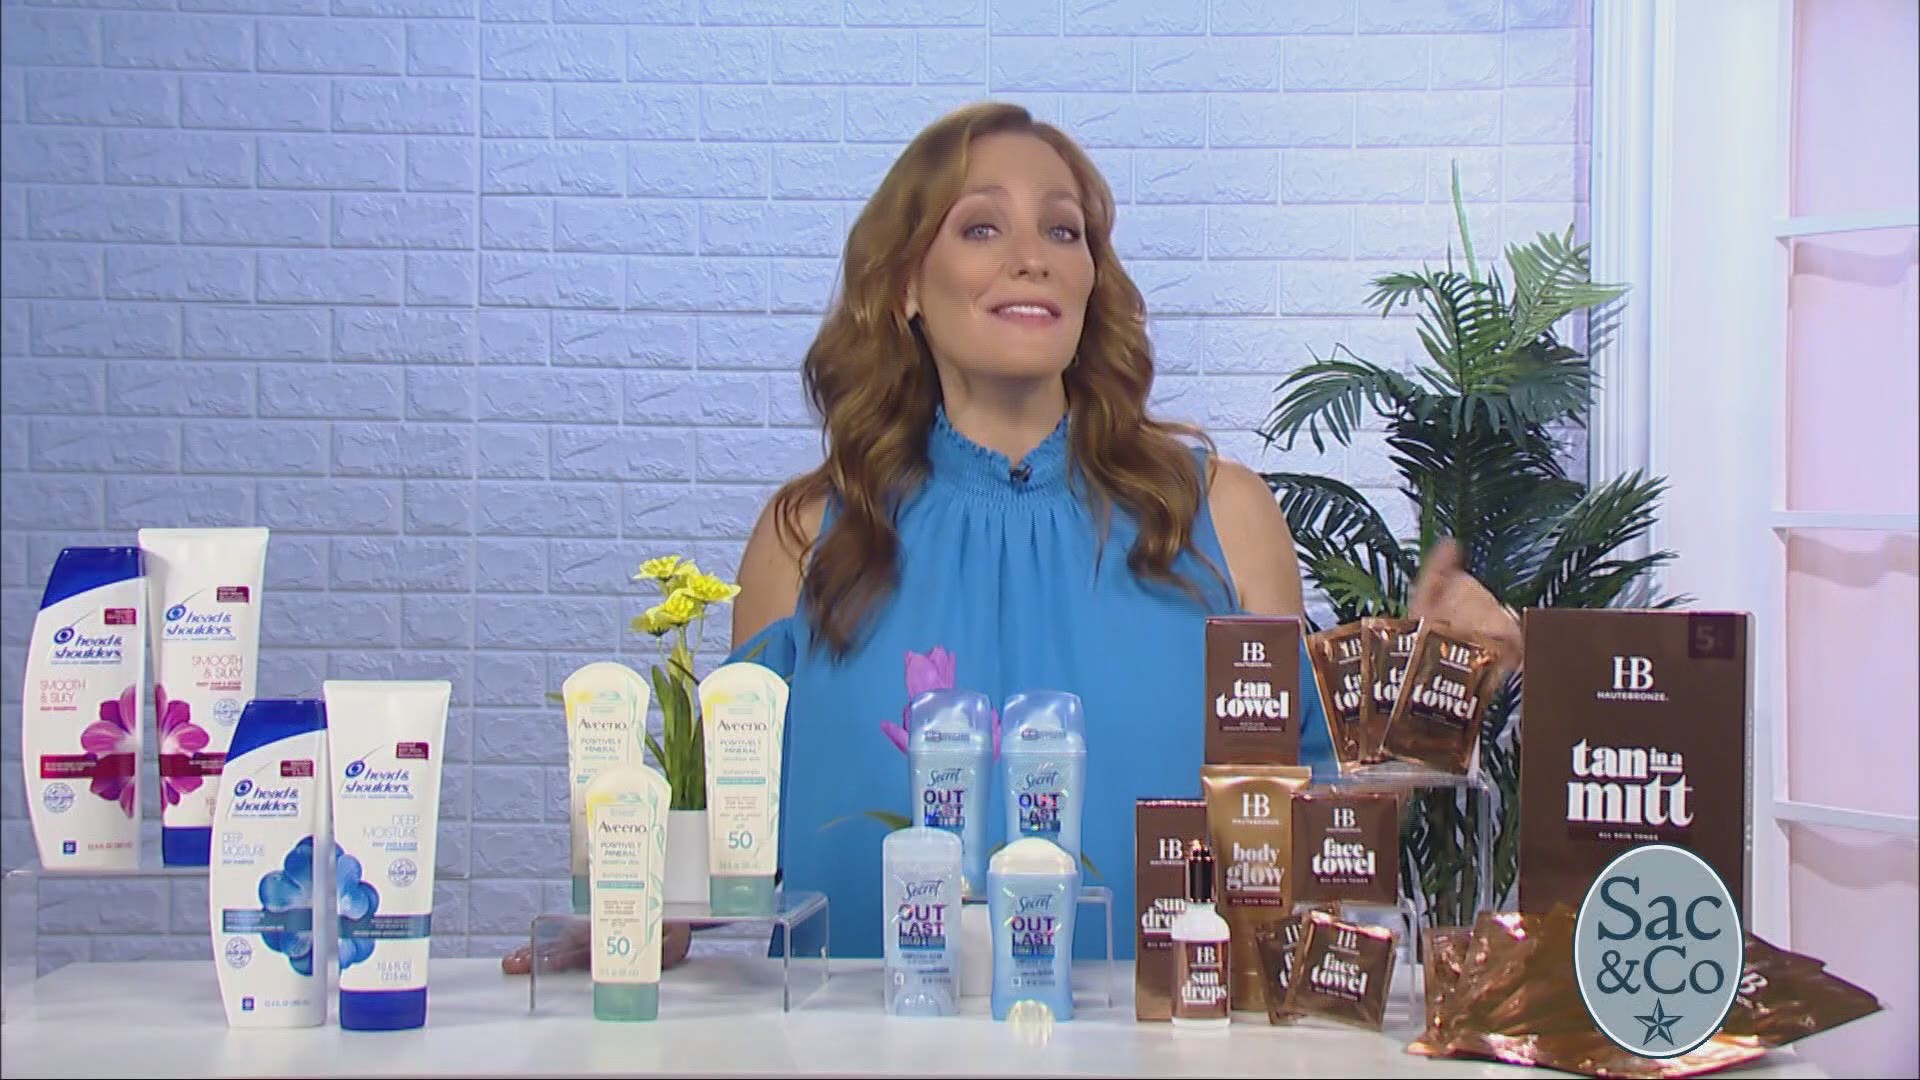 Beauty expert Cheryl Kramer Kaye has the goods to survive summer in style! The following is a paid segment sponsored by Secret, Head & Shoulders, Haute Bronze, Aveeno.